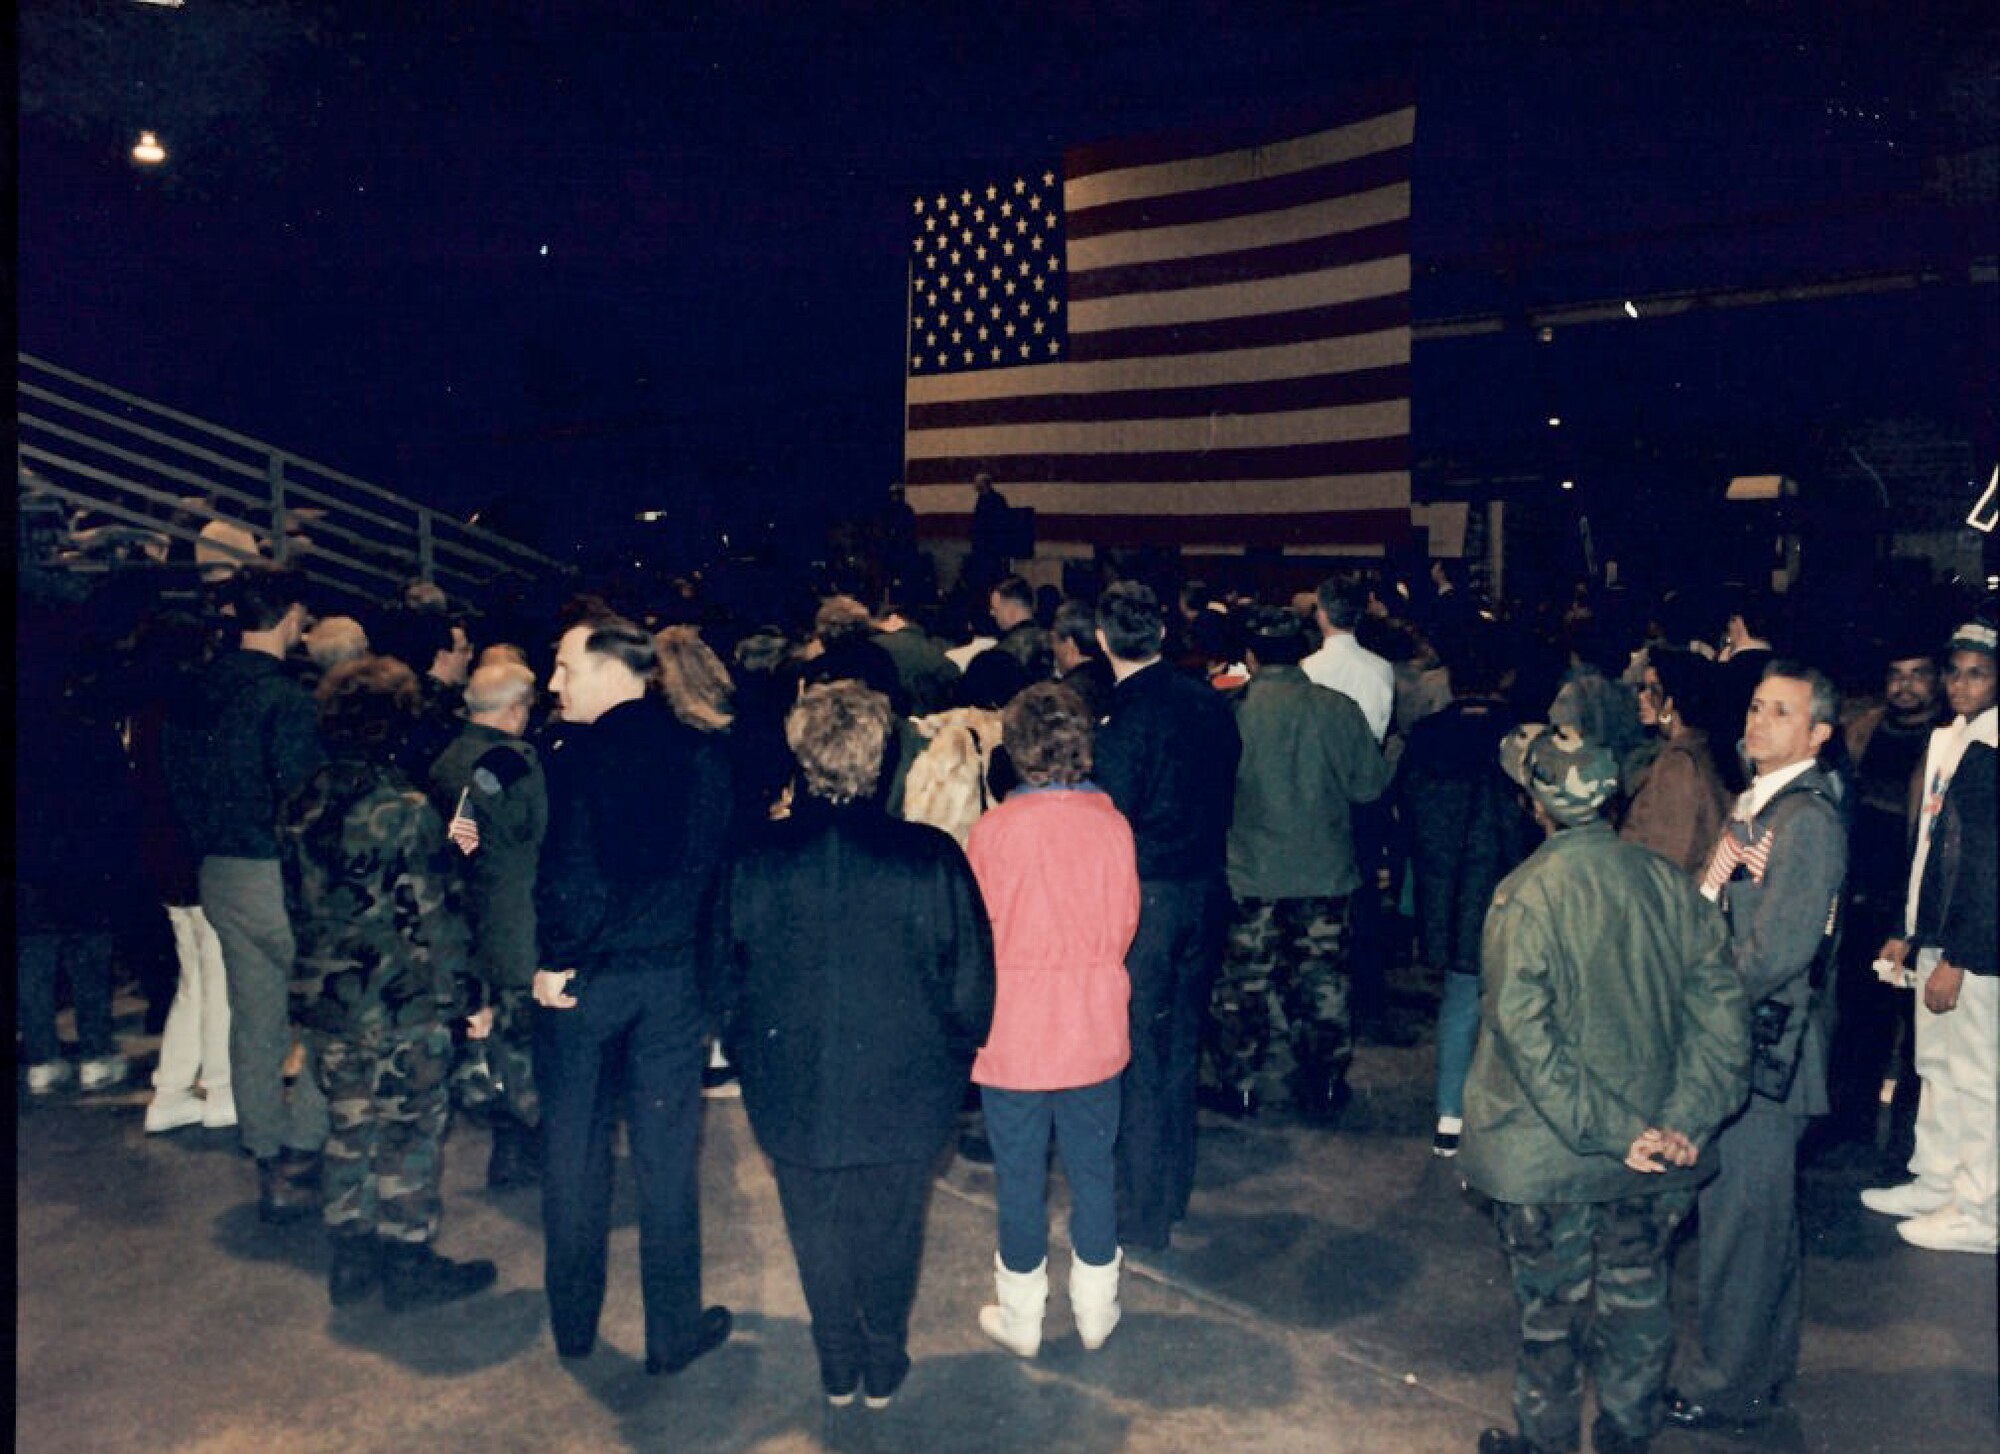 Air Force Reserve members say their farewells at the send off event prior to deploying in support of Operation Desert Storm in 1991.(U.S. Air Force photo provided)